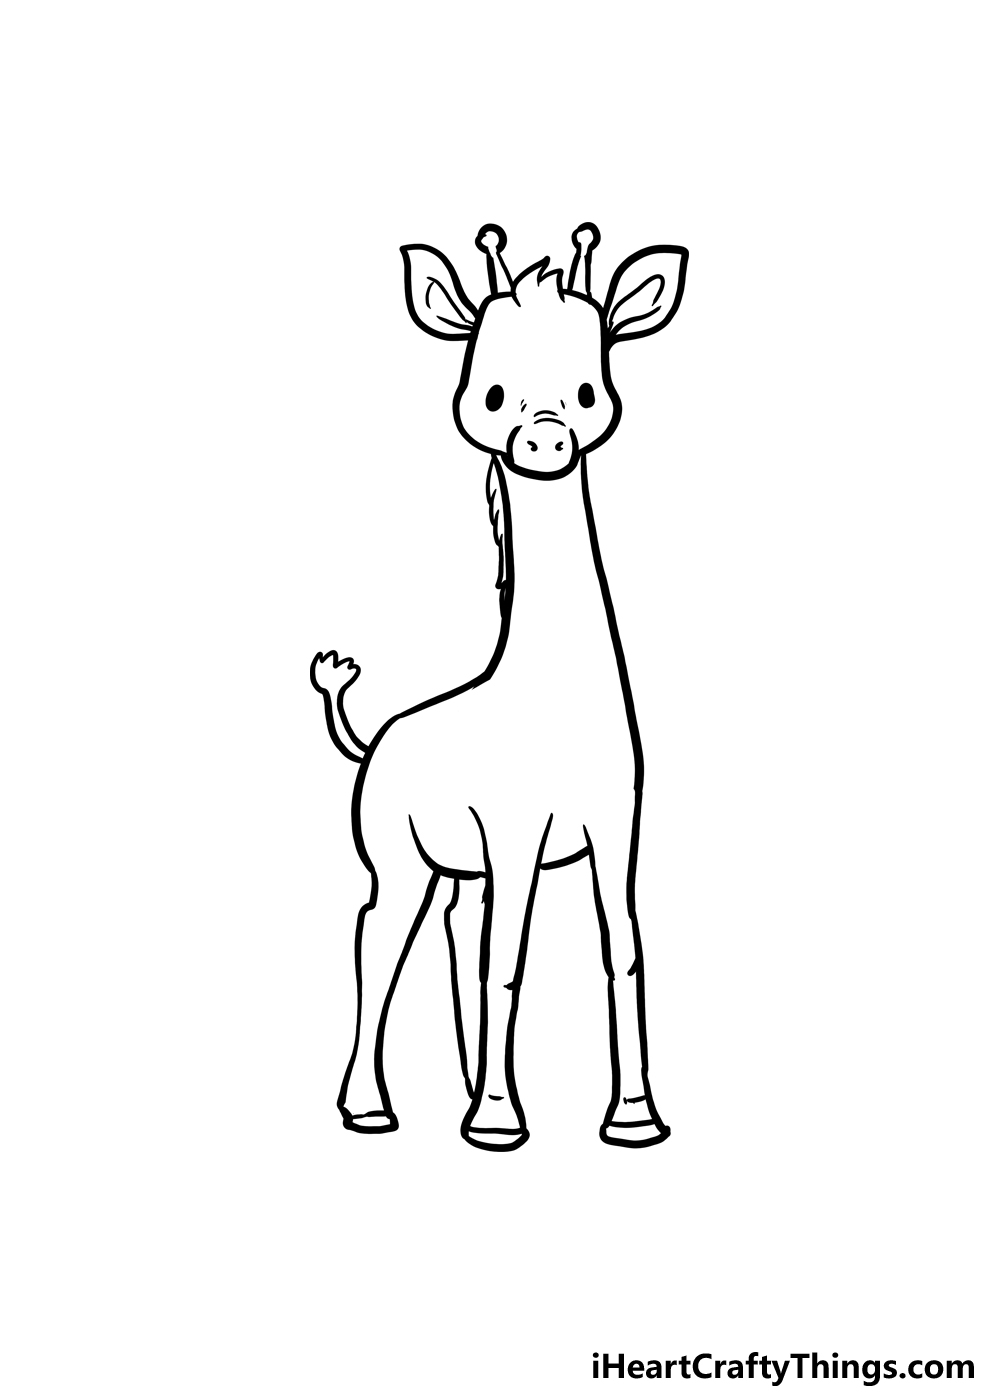 Giraffe Clipart Black And White Giraffe Walking Childrens Drawing, Giraffe  Drawing, Giraffe Sketch, Black And White PNG Transparent Clipart Image and  PSD File for Free Download